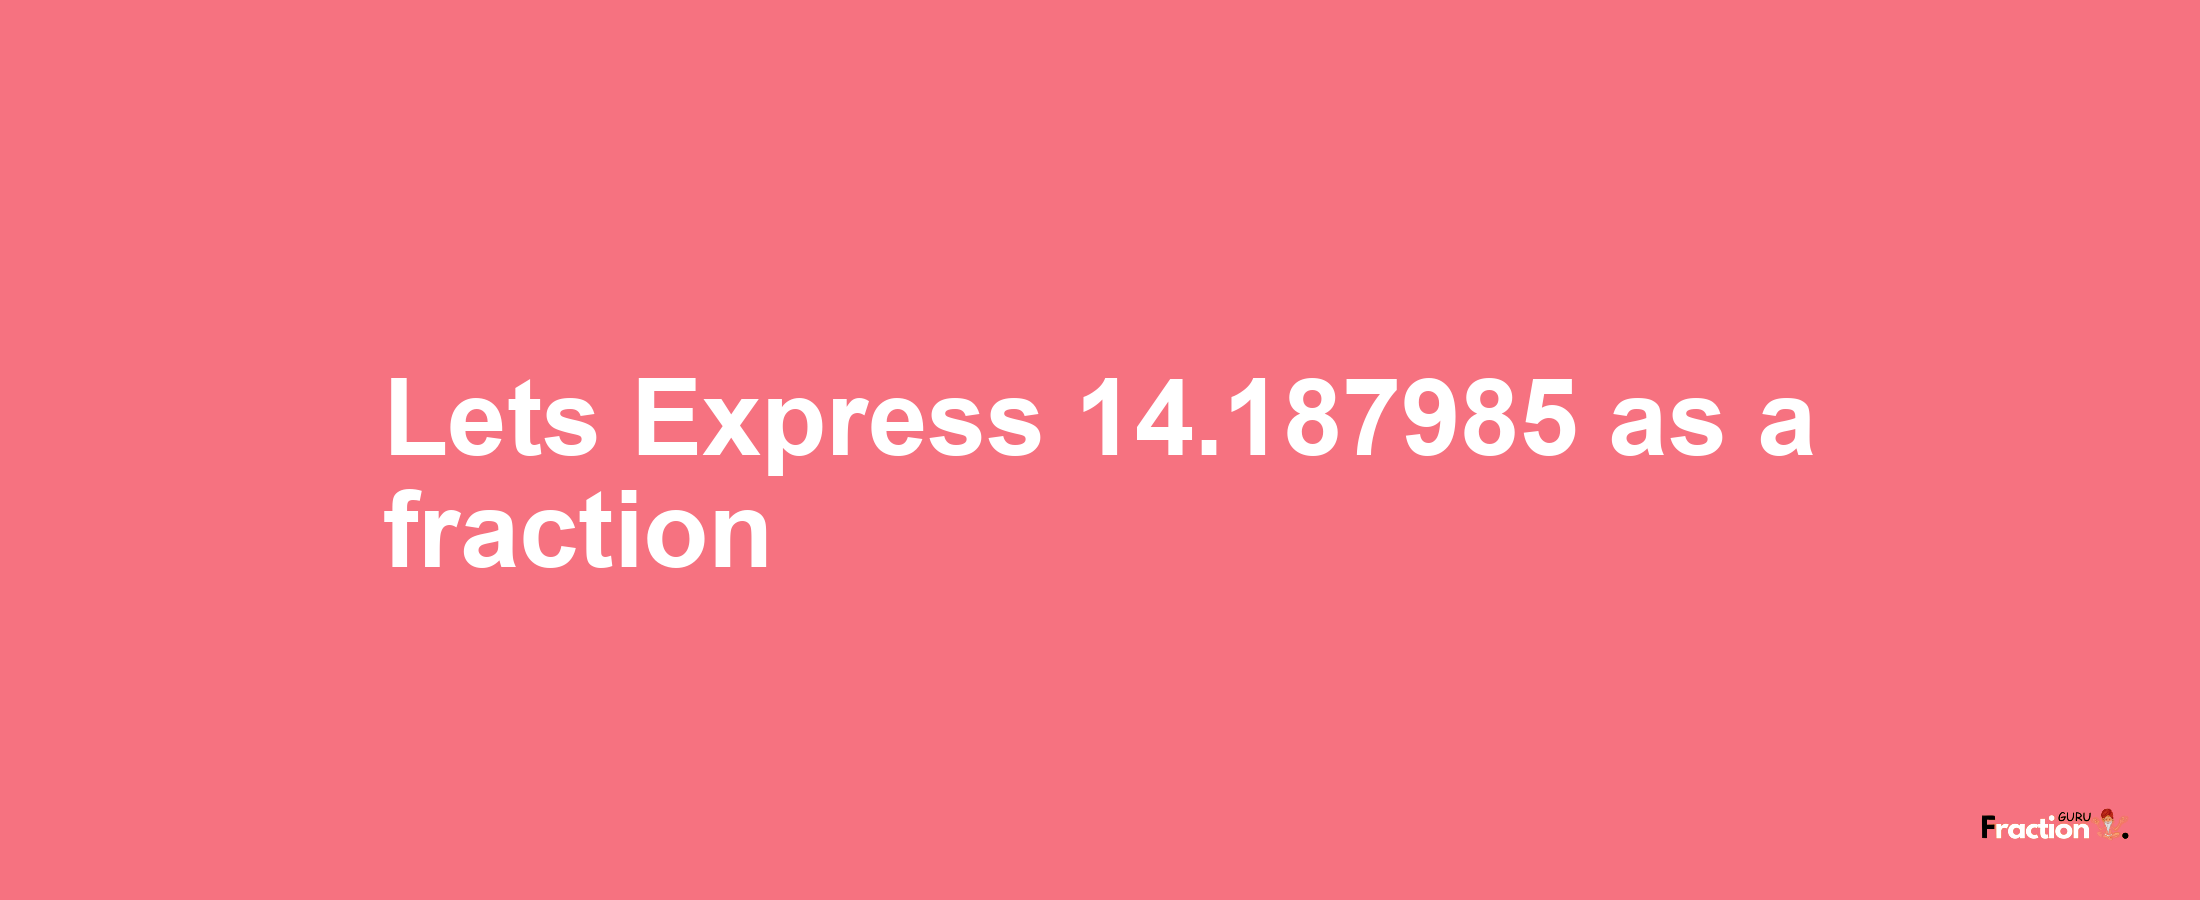 Lets Express 14.187985 as afraction